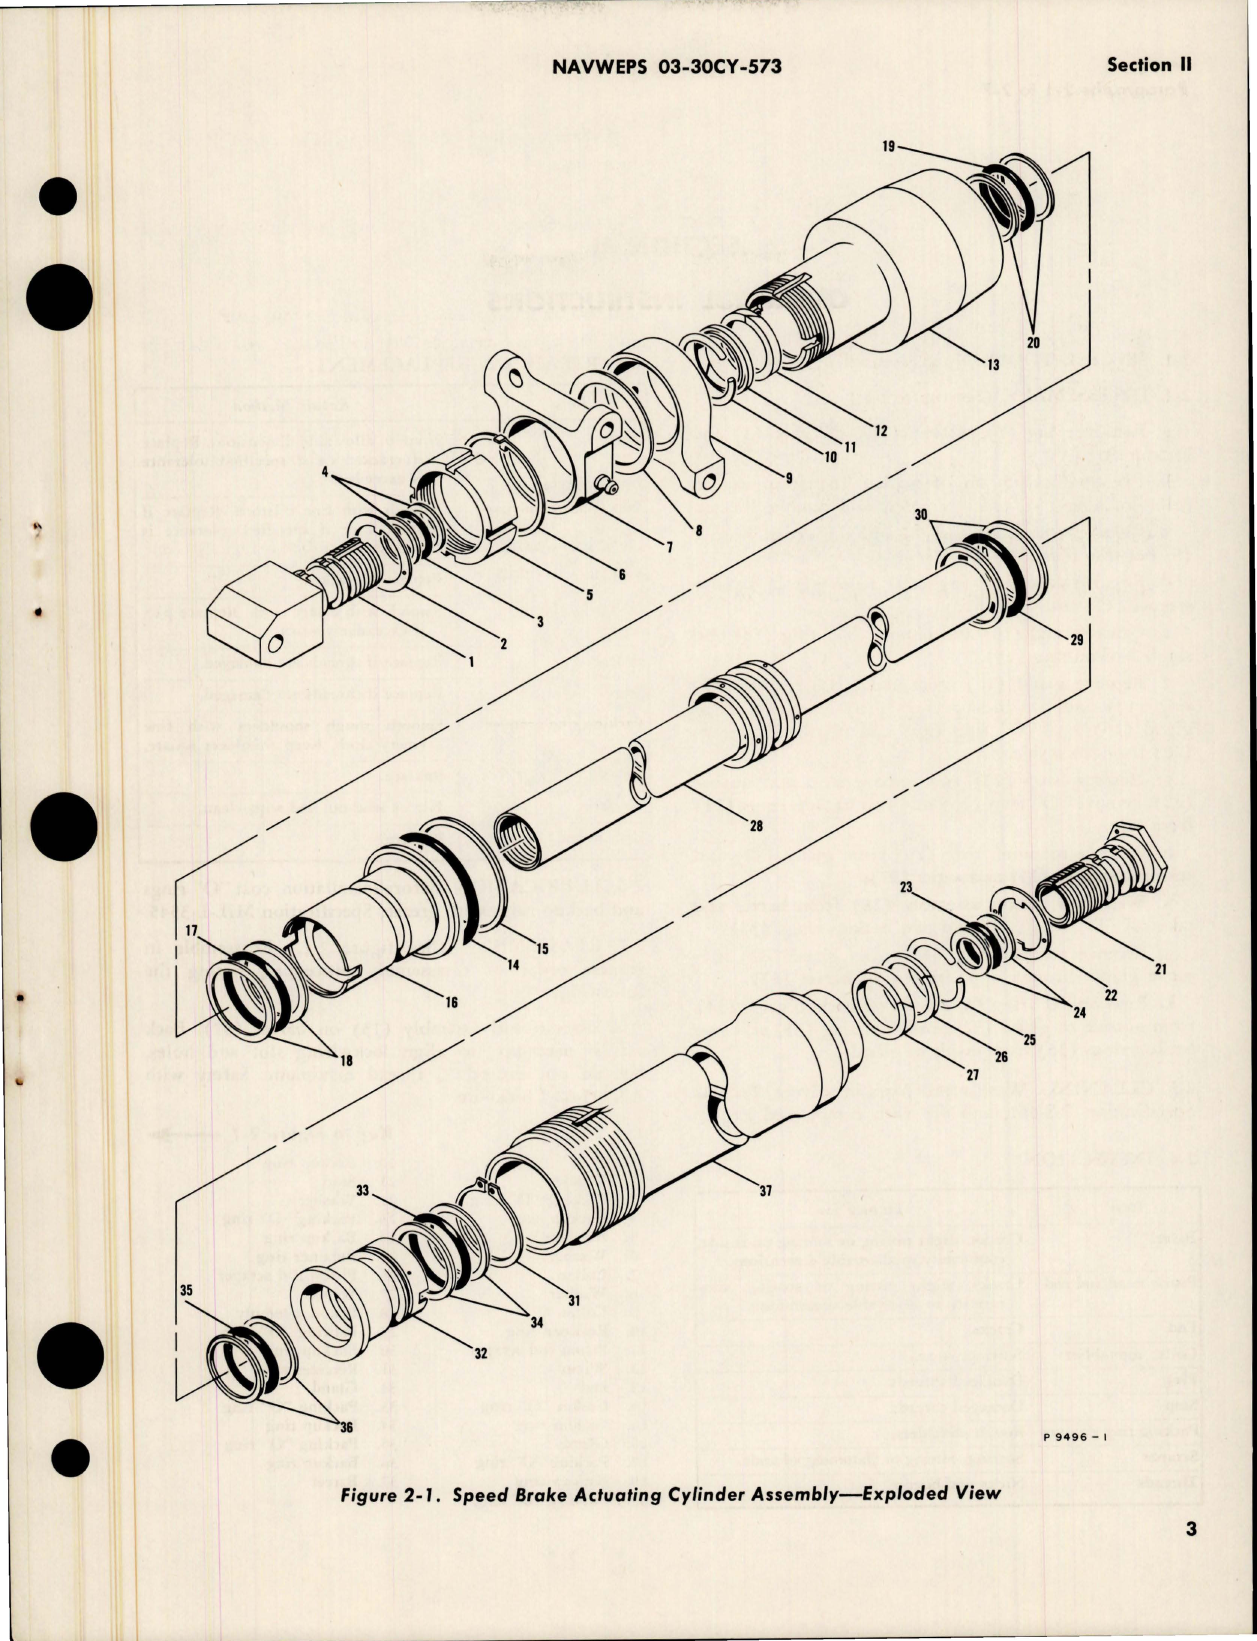 Sample page 7 from AirCorps Library document: Overhaul Instructions for Speed Brake Actuating Cylinder